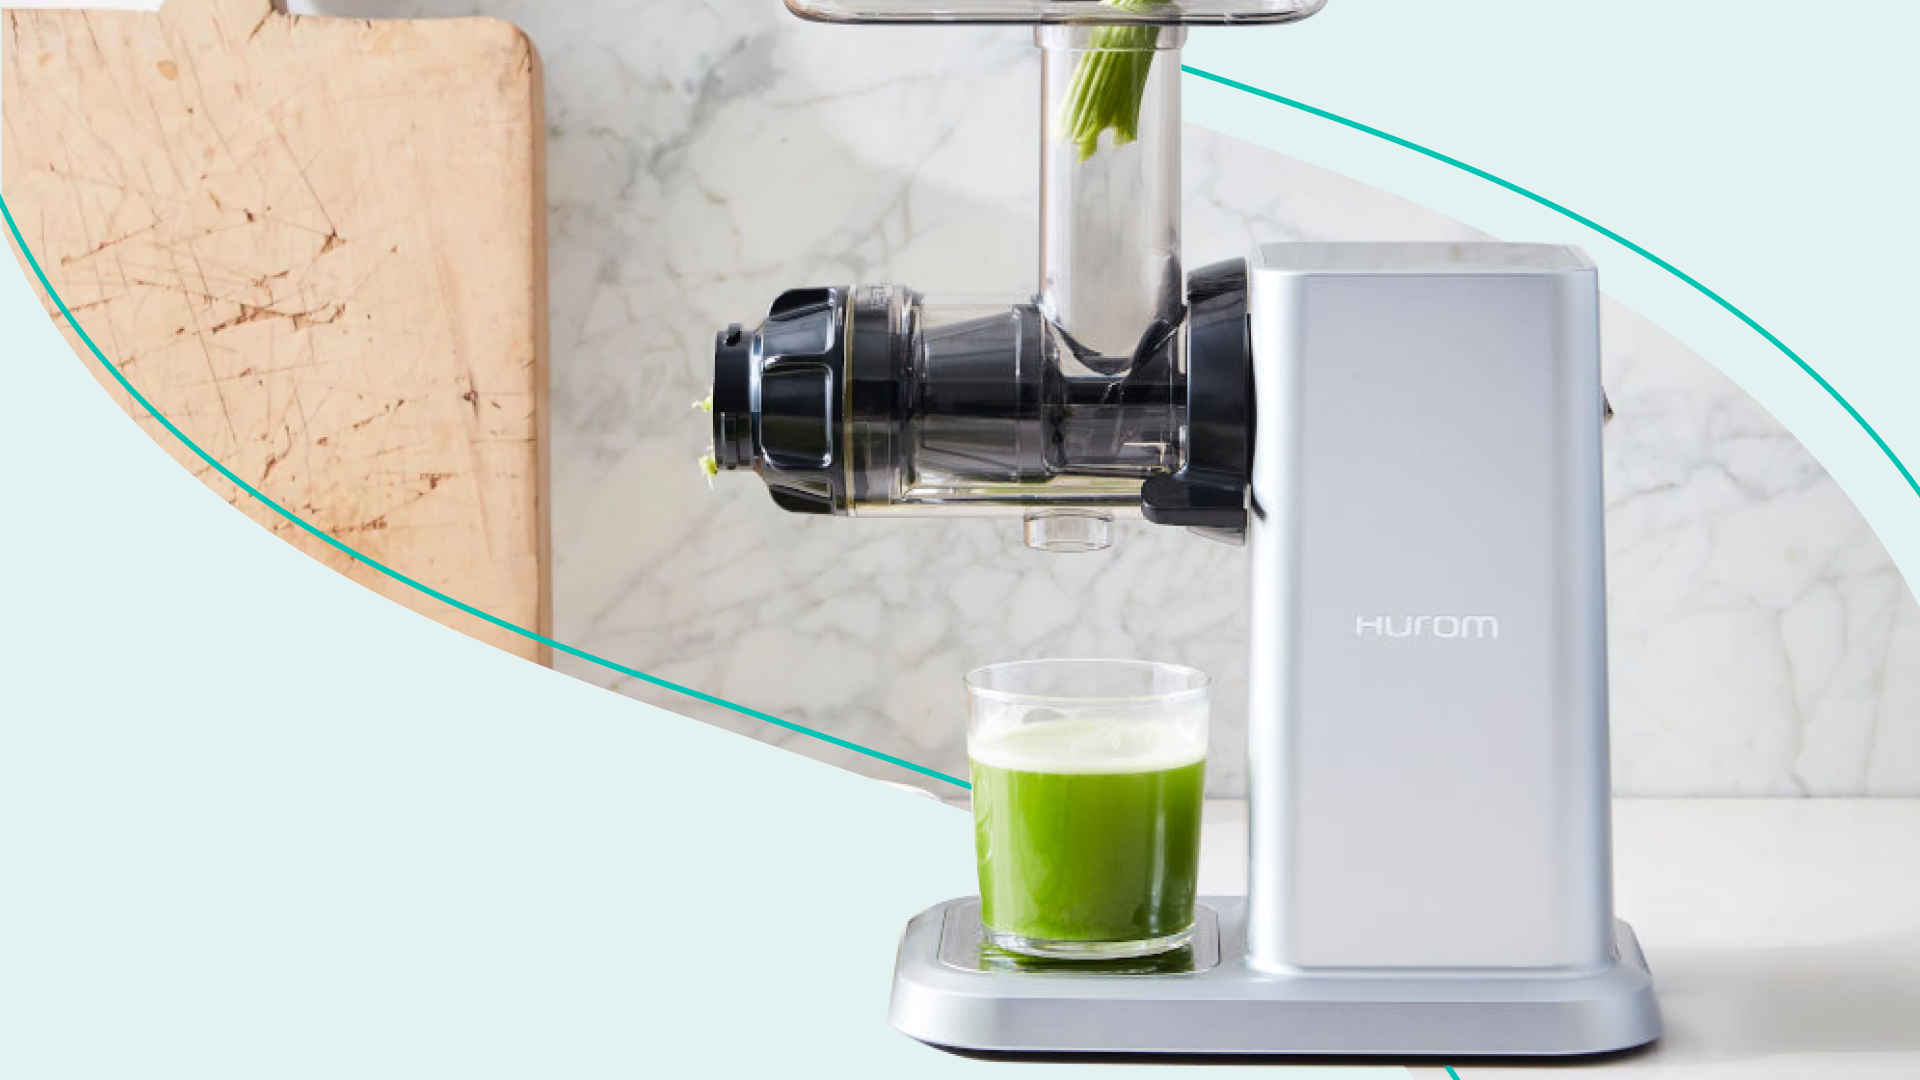 Today I tried out my Ninja Cold Press juicer and it's an experience I , Ninja  Cold Press Juicer